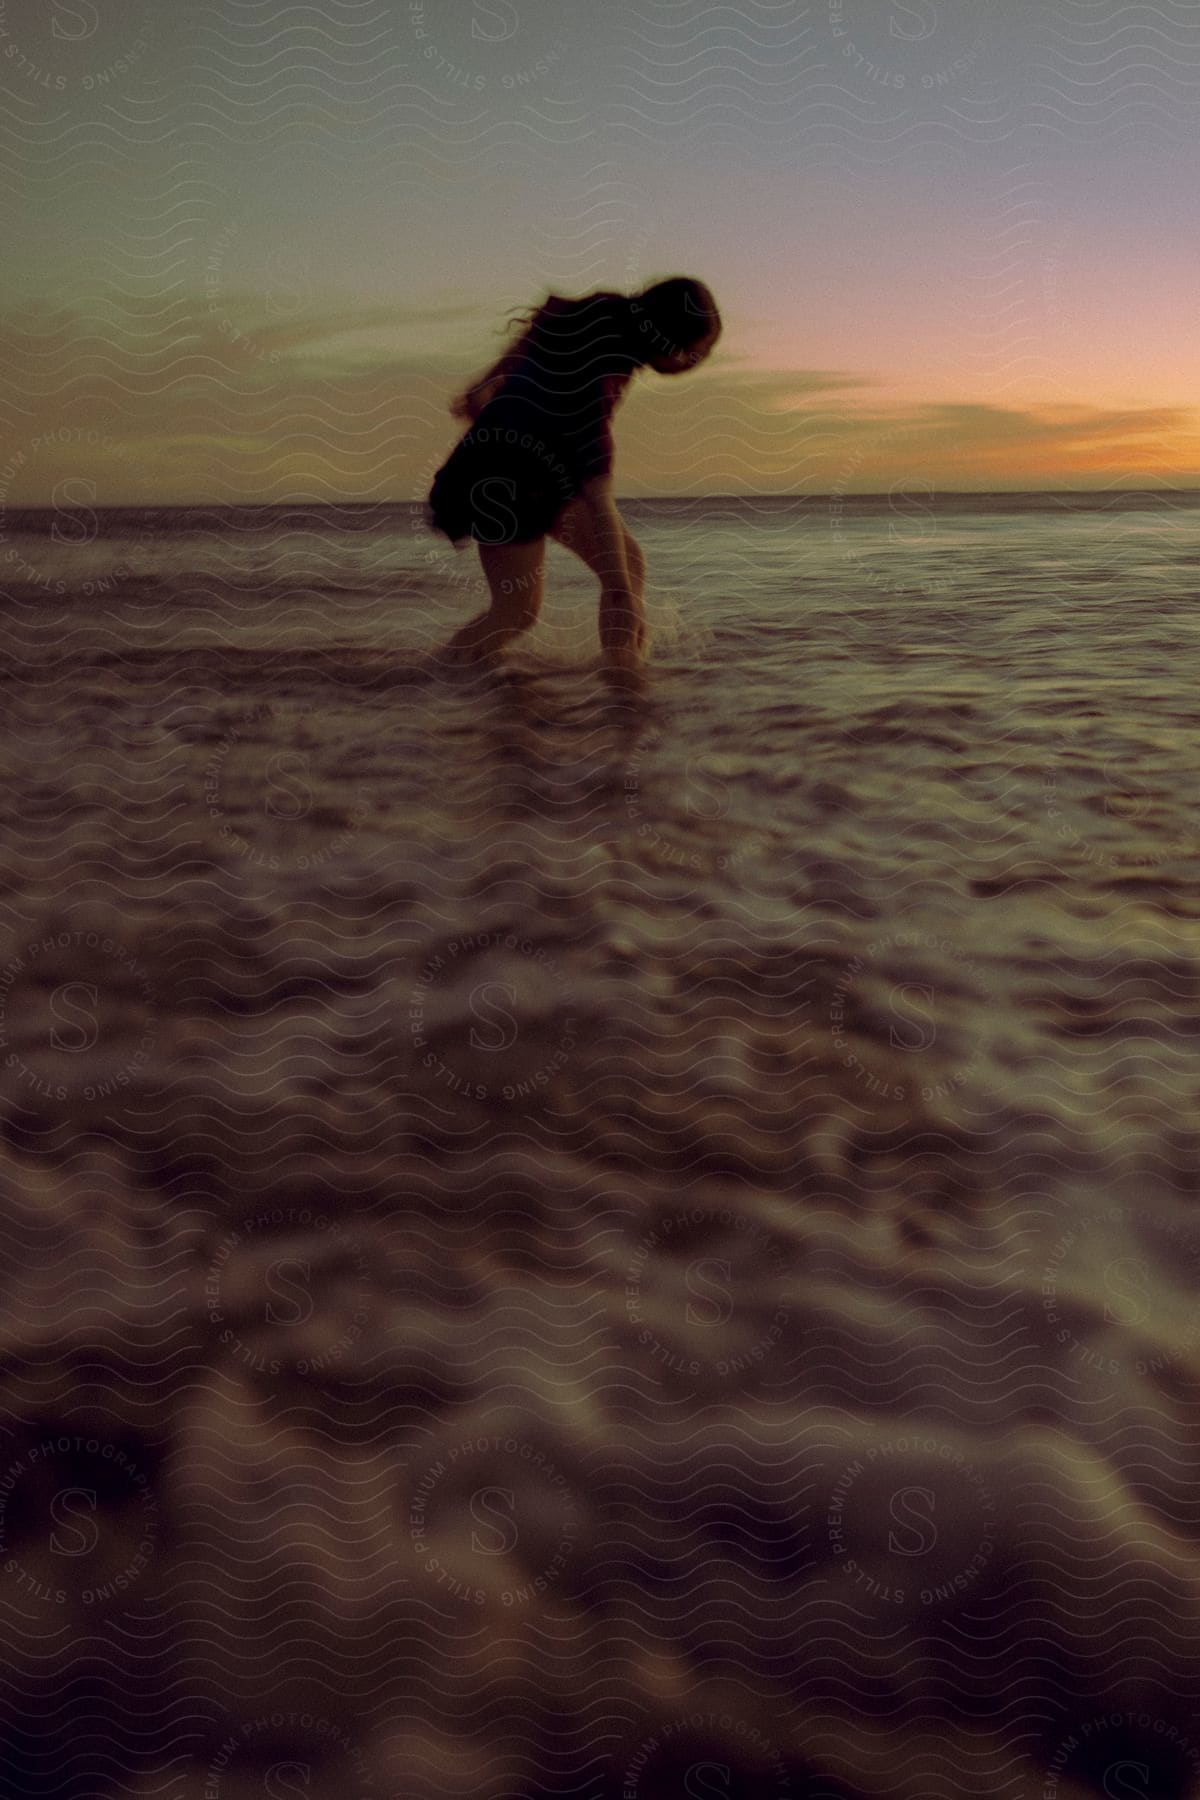 A woman splashes water in the ocean at dusk